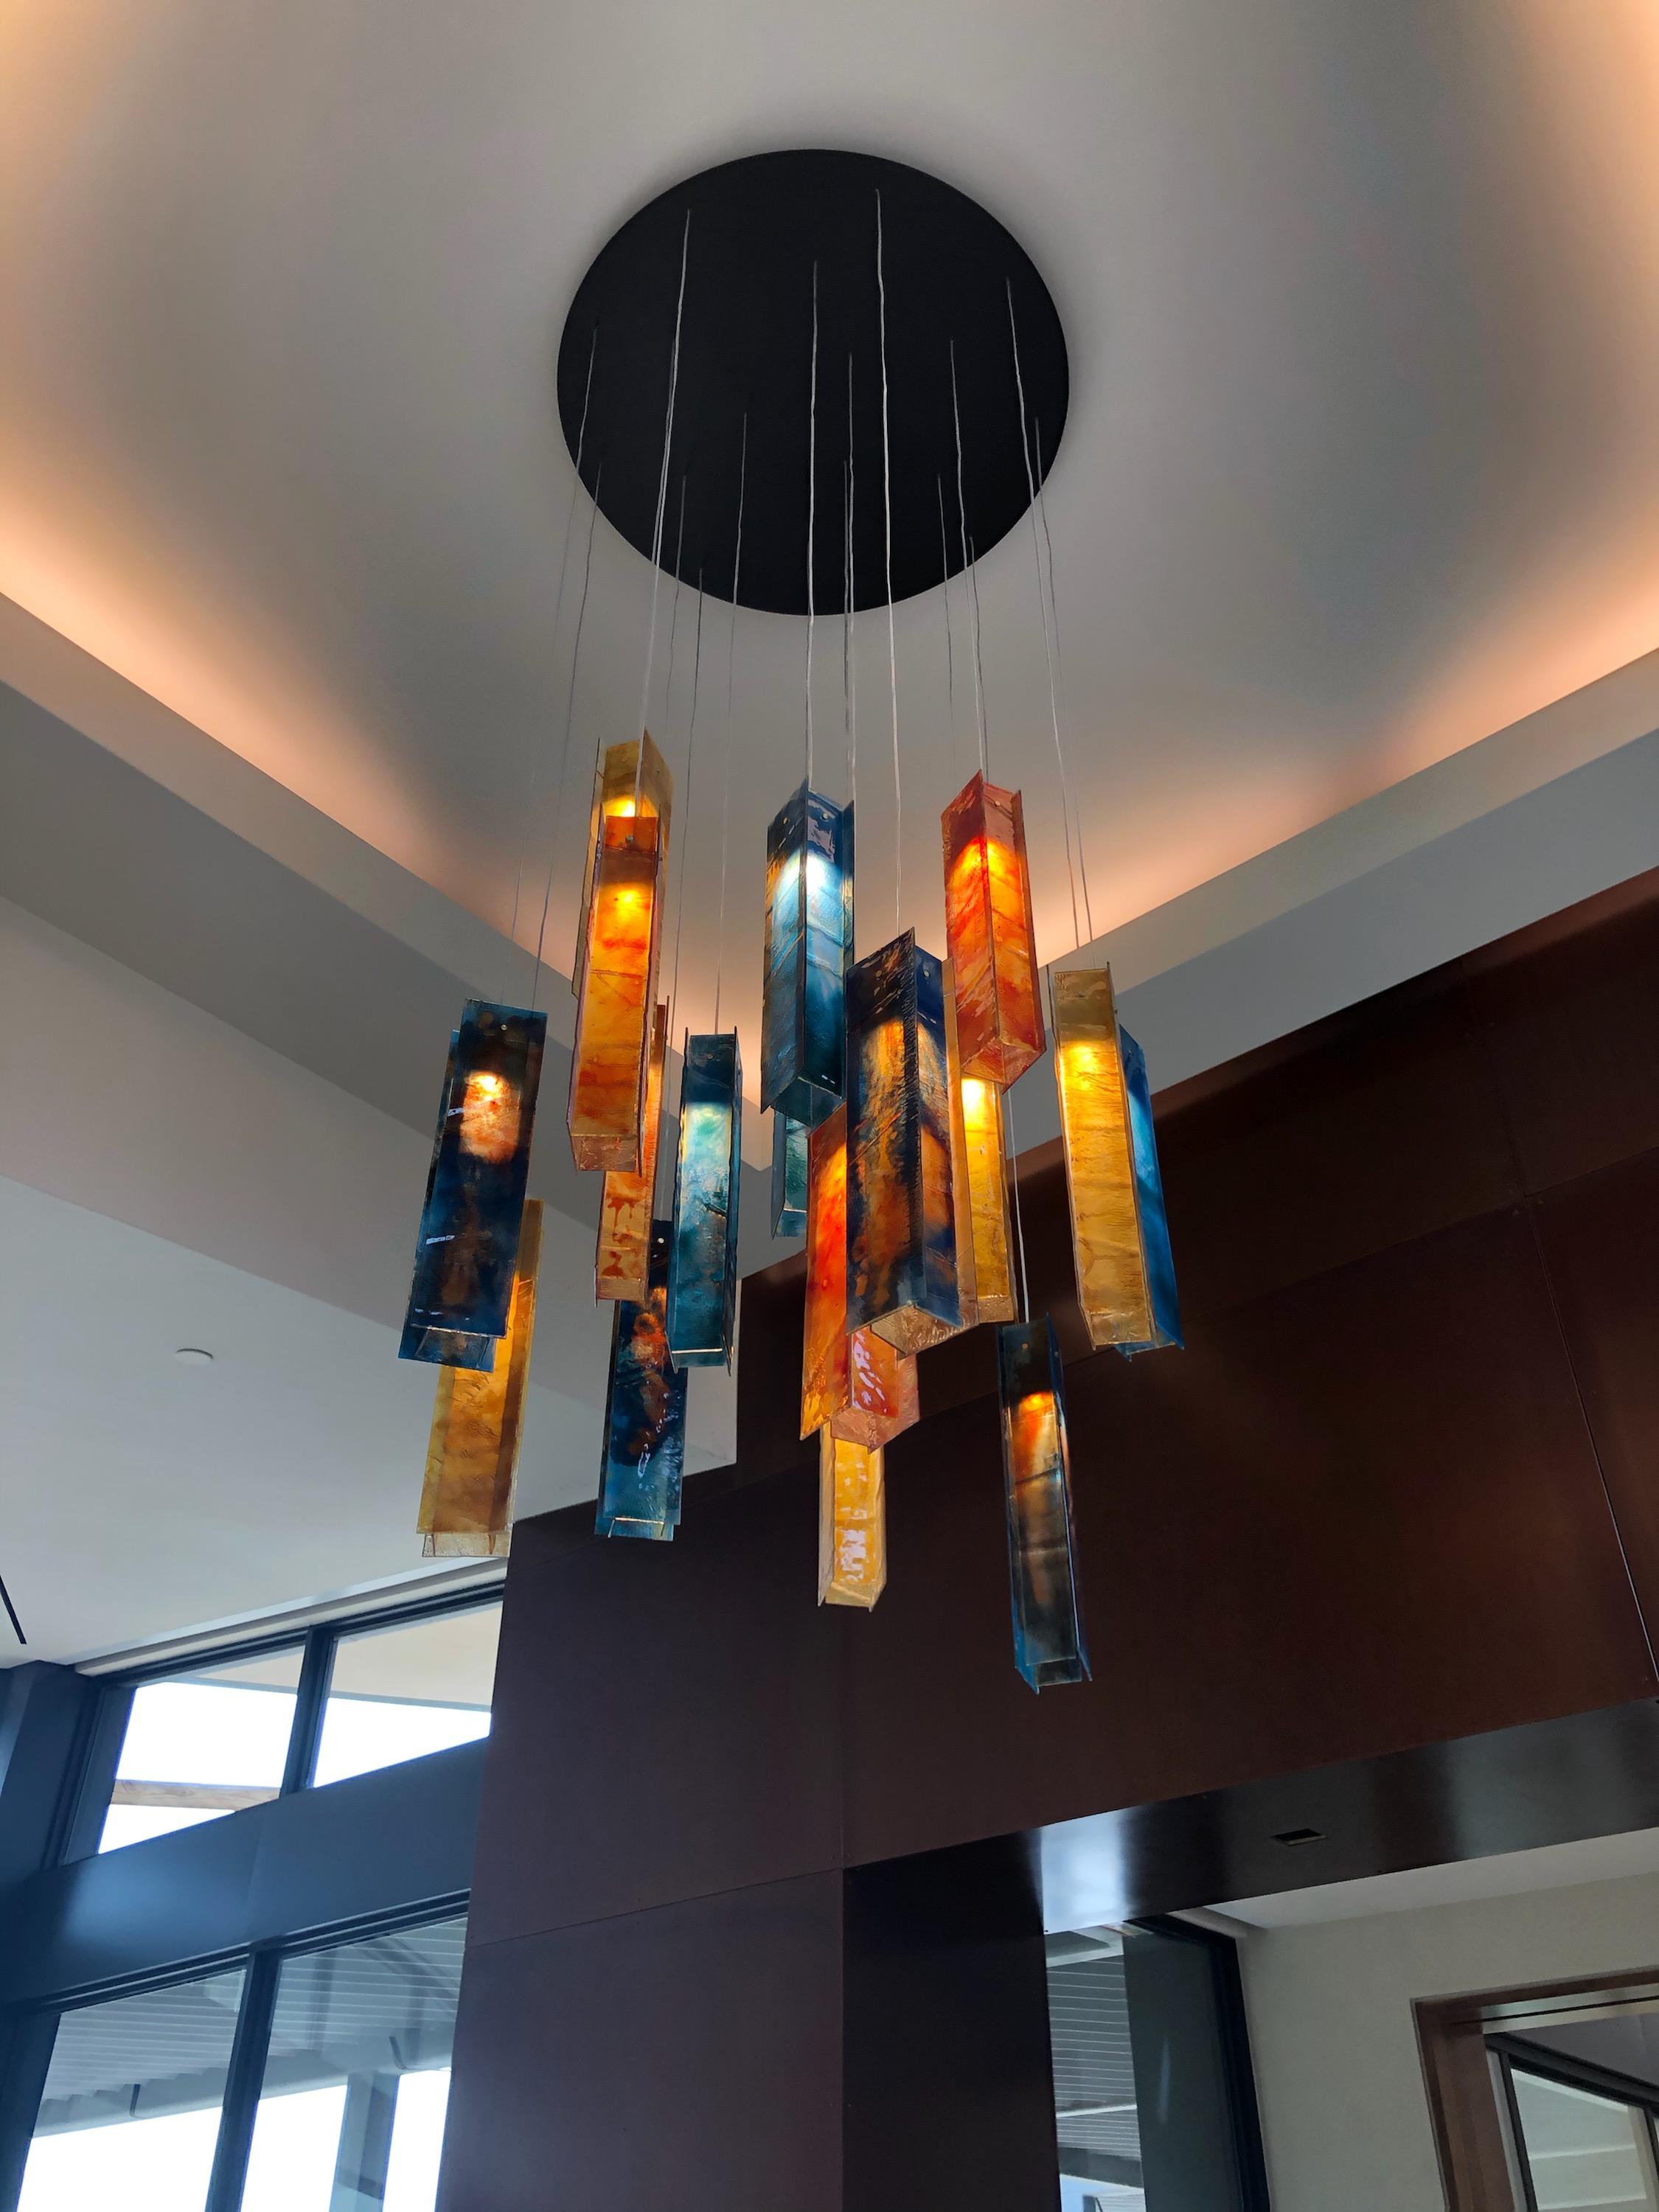 12 Pendant Chandelier 
Glass Colors in Original Picture: Honey, Autumn Red, Ocean
Each rectangular piece is made from 4 glass panels
Height: 17.7” (45 cm)
Width: 3.93” (10 cm)
Depth: 2.36” (6 cm)
Total Drop: Please let us know how high your ceiling